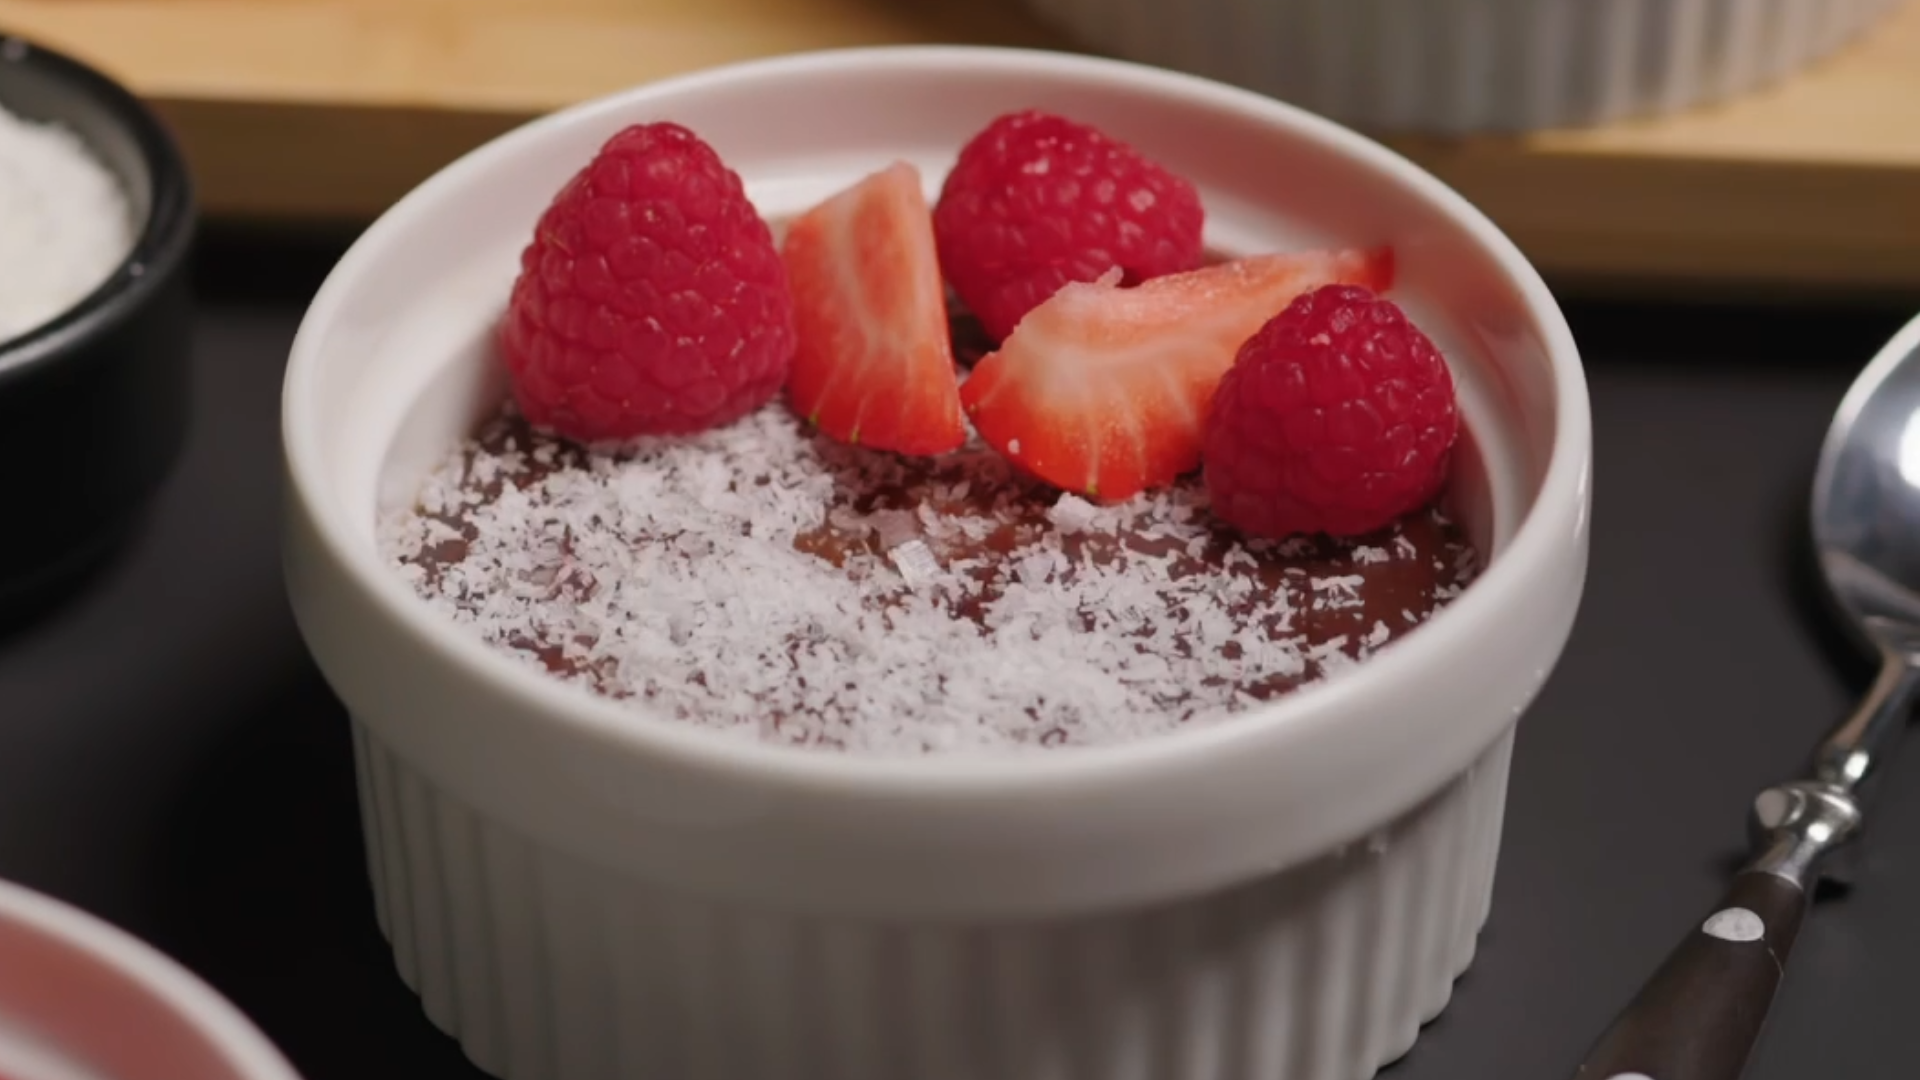 Creamy chocolate and coconut pudding